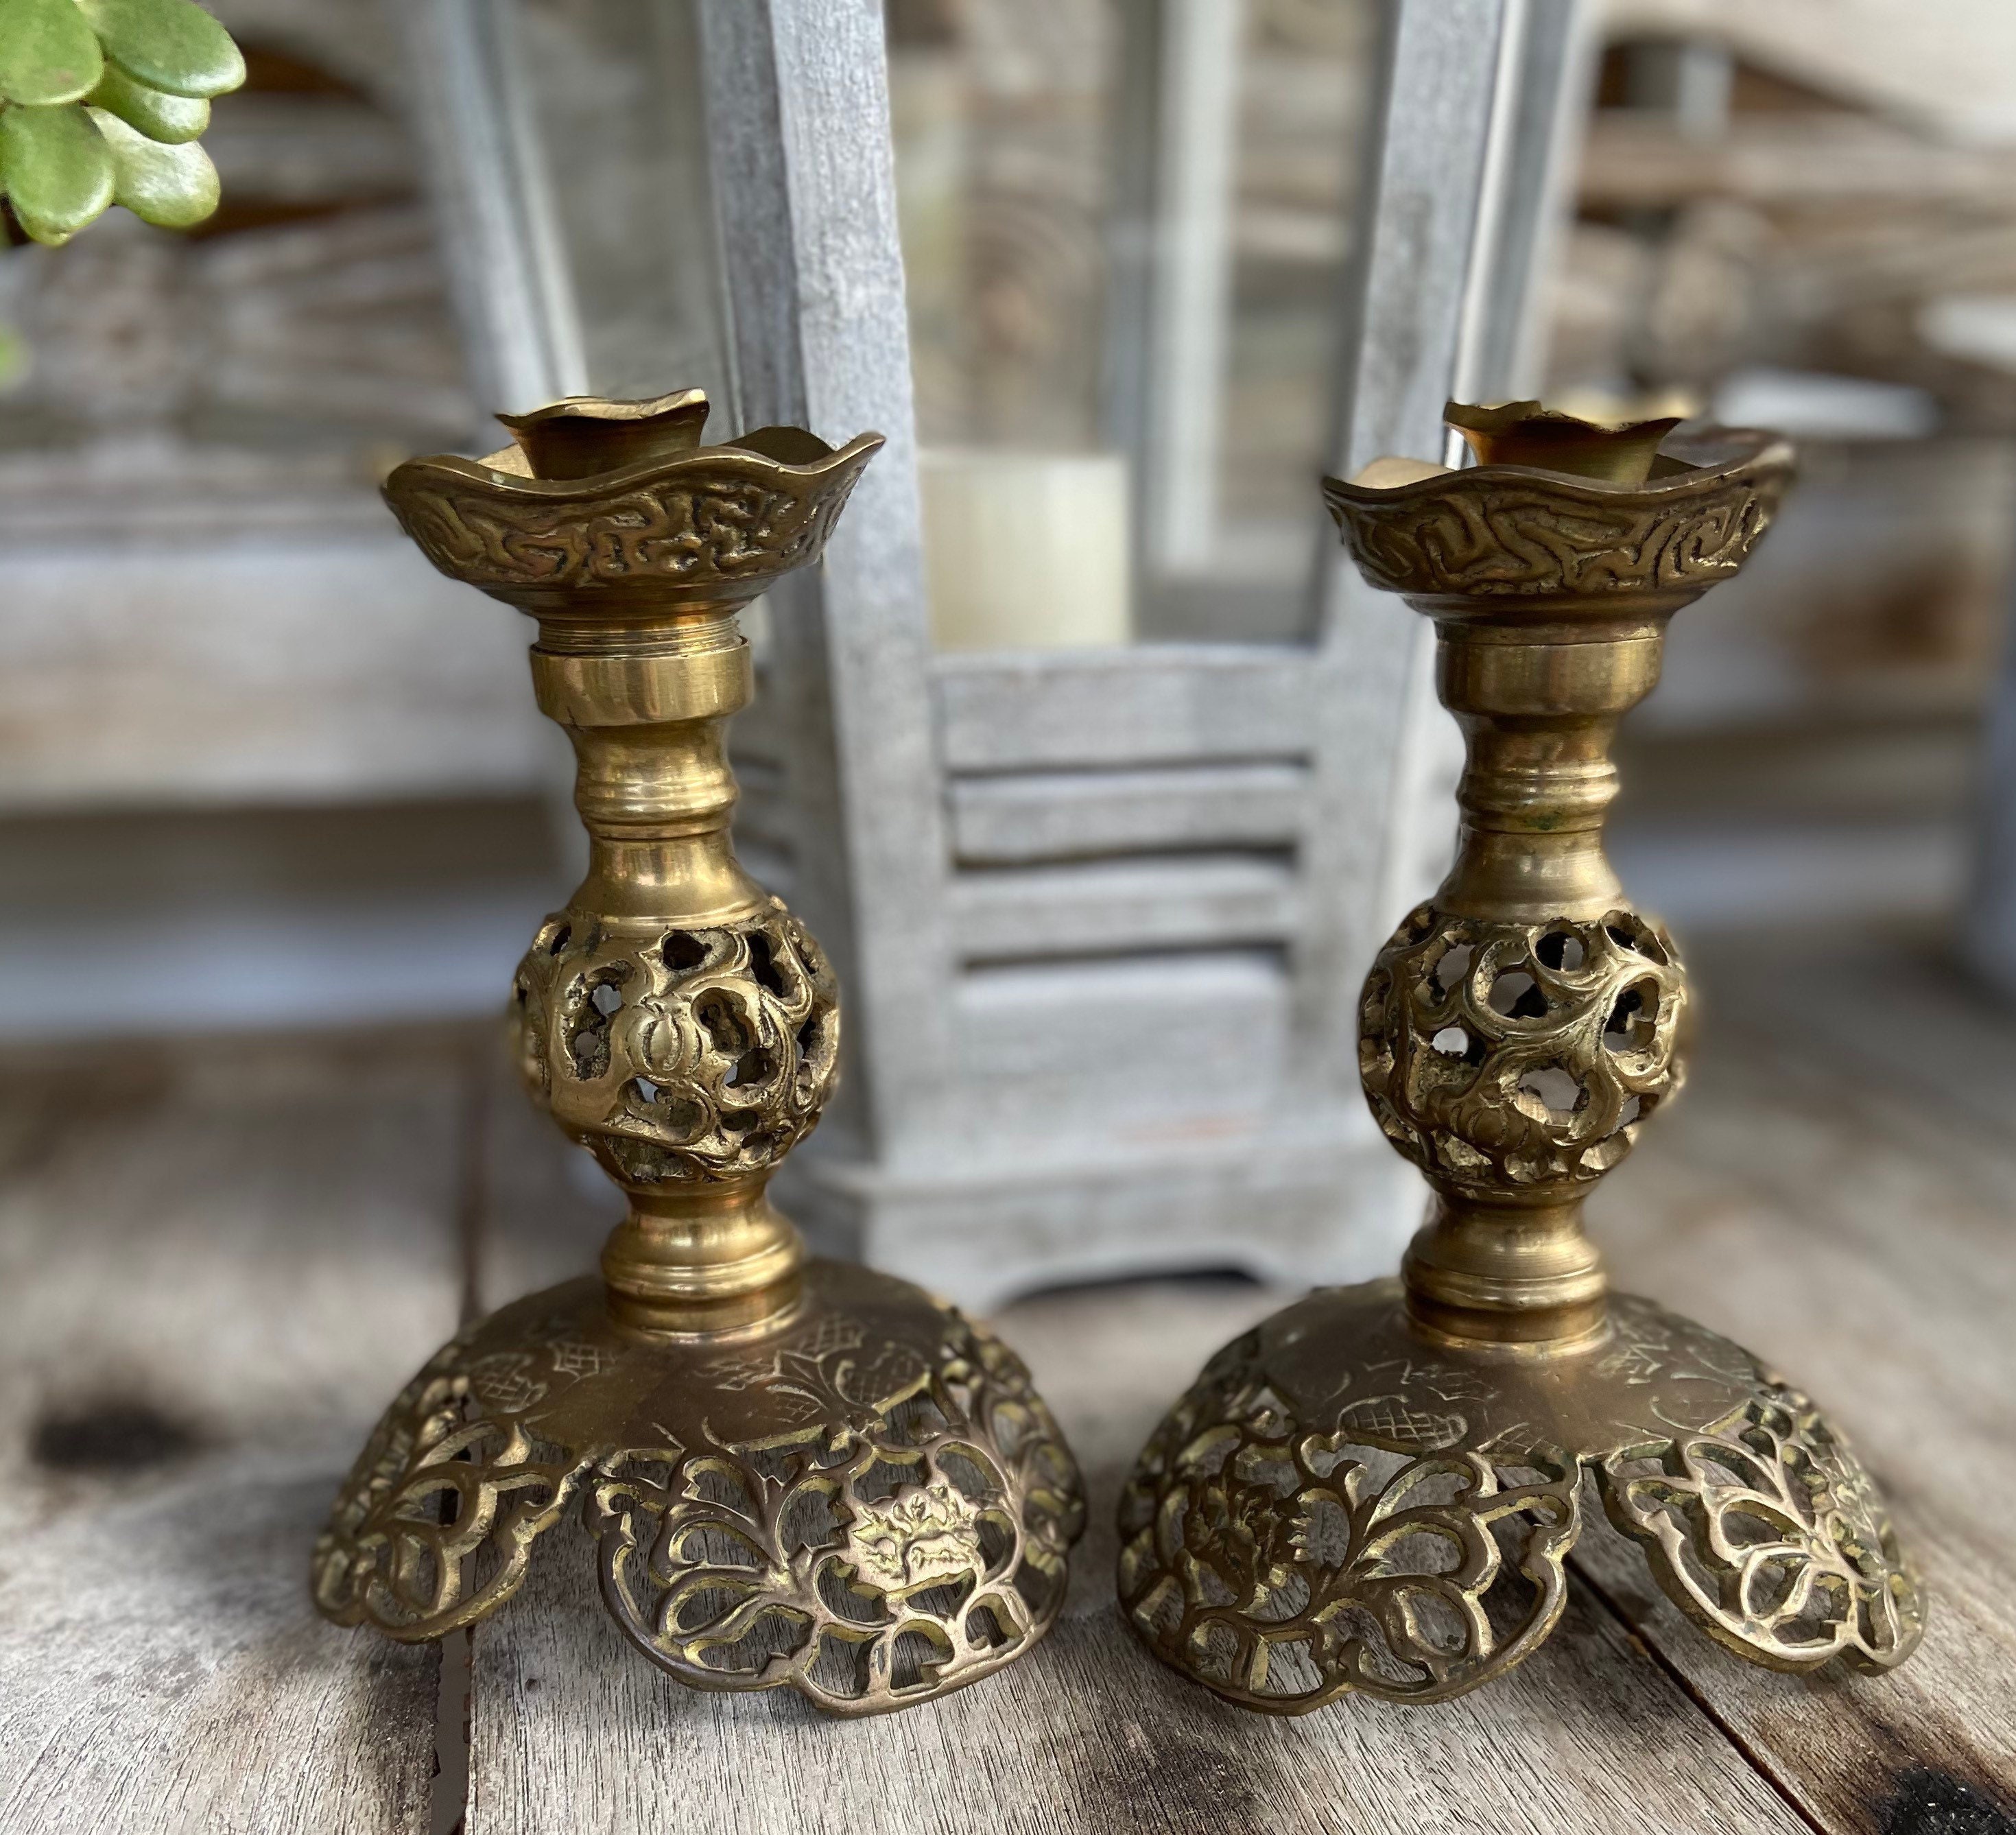 Pair of Indian Brass Candle Holders Candelabras Candle Sticks Unique 